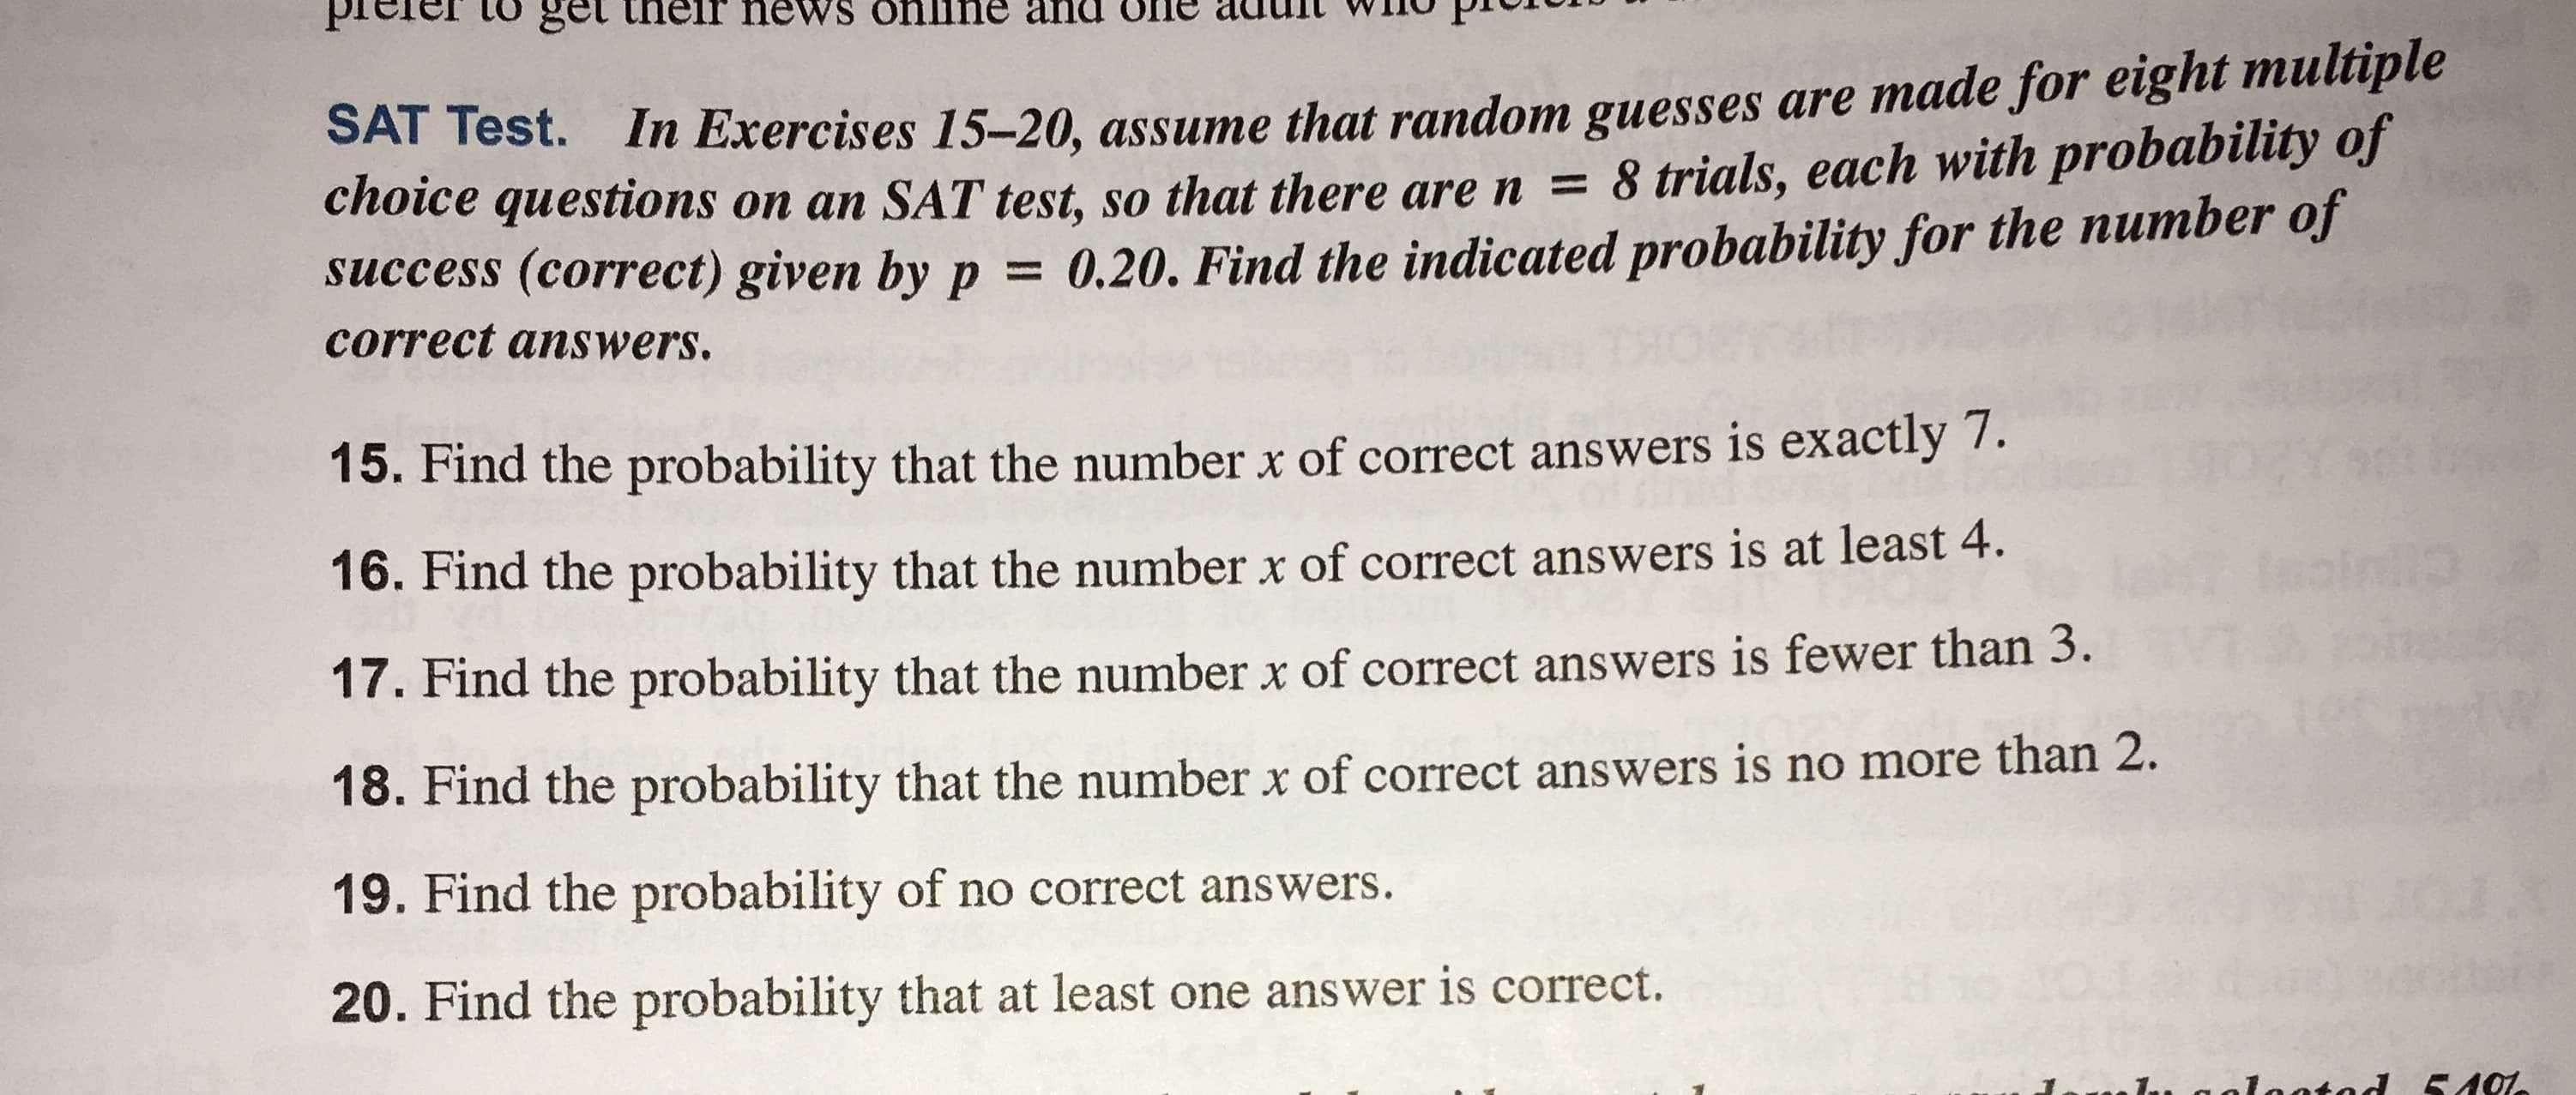 get
SAT Test. In Exercises 15-20, assume that random guesses are made for eight multiple
choice questions on an SAT test, so that there are n = 8 trials, each with probability of
uccess (correct) given by p = 0.20. Find the indicated probability for the number of
correct answers.
15. Find the probability that the number x of correct answers is exactly 7.
16. Find the probability that the number x of correct answers is at least 4.
17. Find the probability that the number x of correct answers is fewer than 3.
100
18. Find the probability that the numberx of correct answers is no more than 2.
19. Find the probability of no correct answers.
4.
20. Find the probability that at least one answer is correct.
, aalaatad 540
